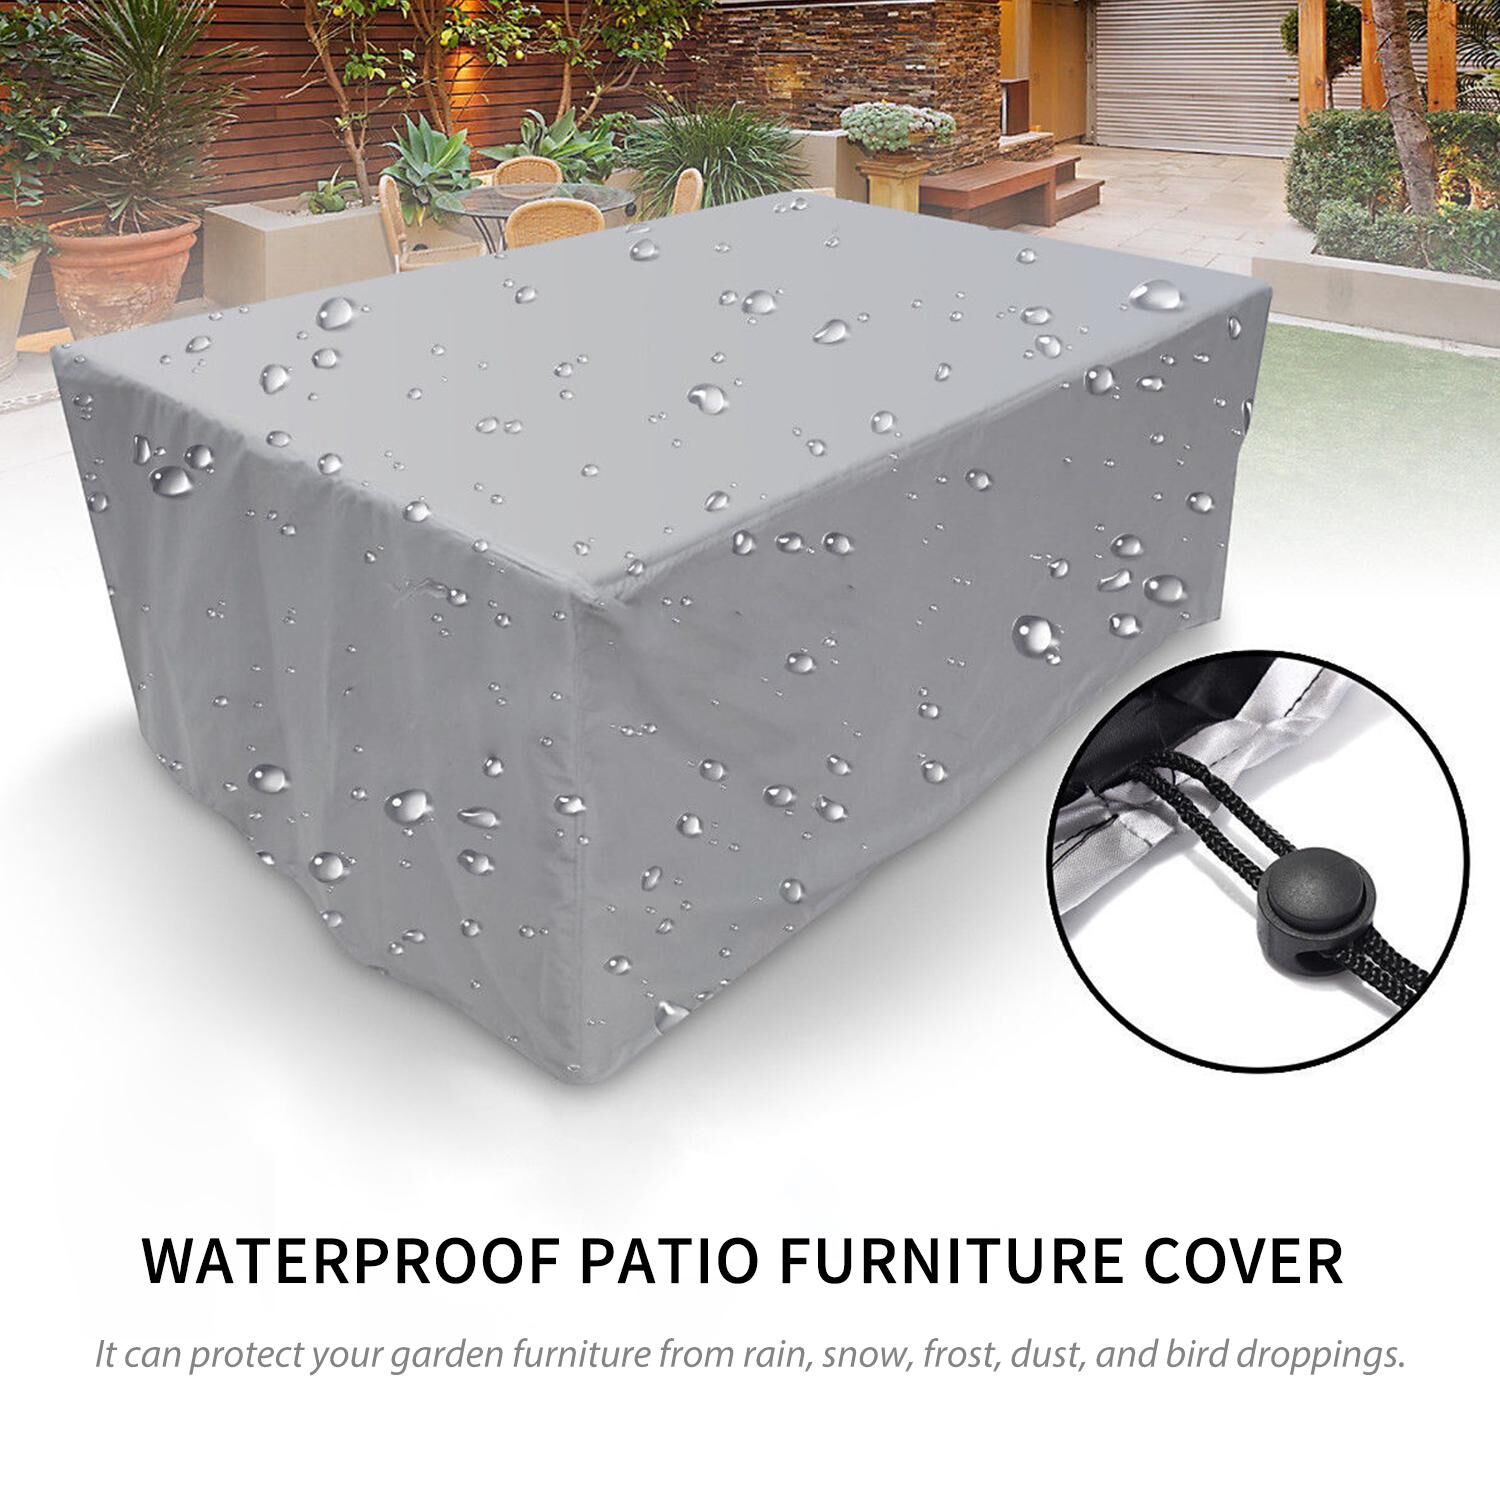 TOMTOP JMS Patio Furniture Cover Garden Table Chair Sofa Cover Waterproof Dust-Proof UV-Resistent Outdoor